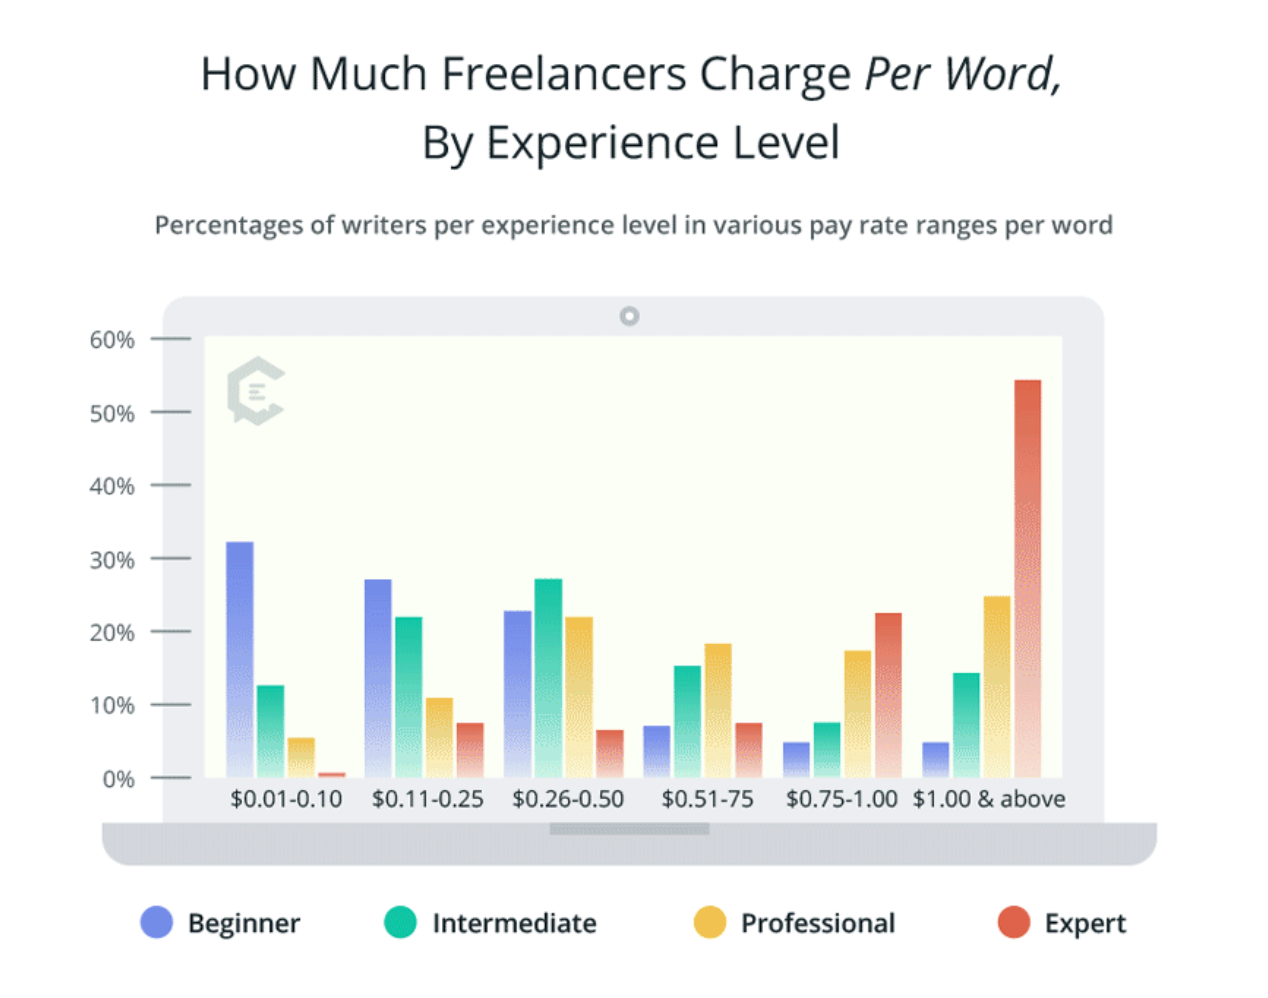 Survey about how much freelancers charge per word by experience level